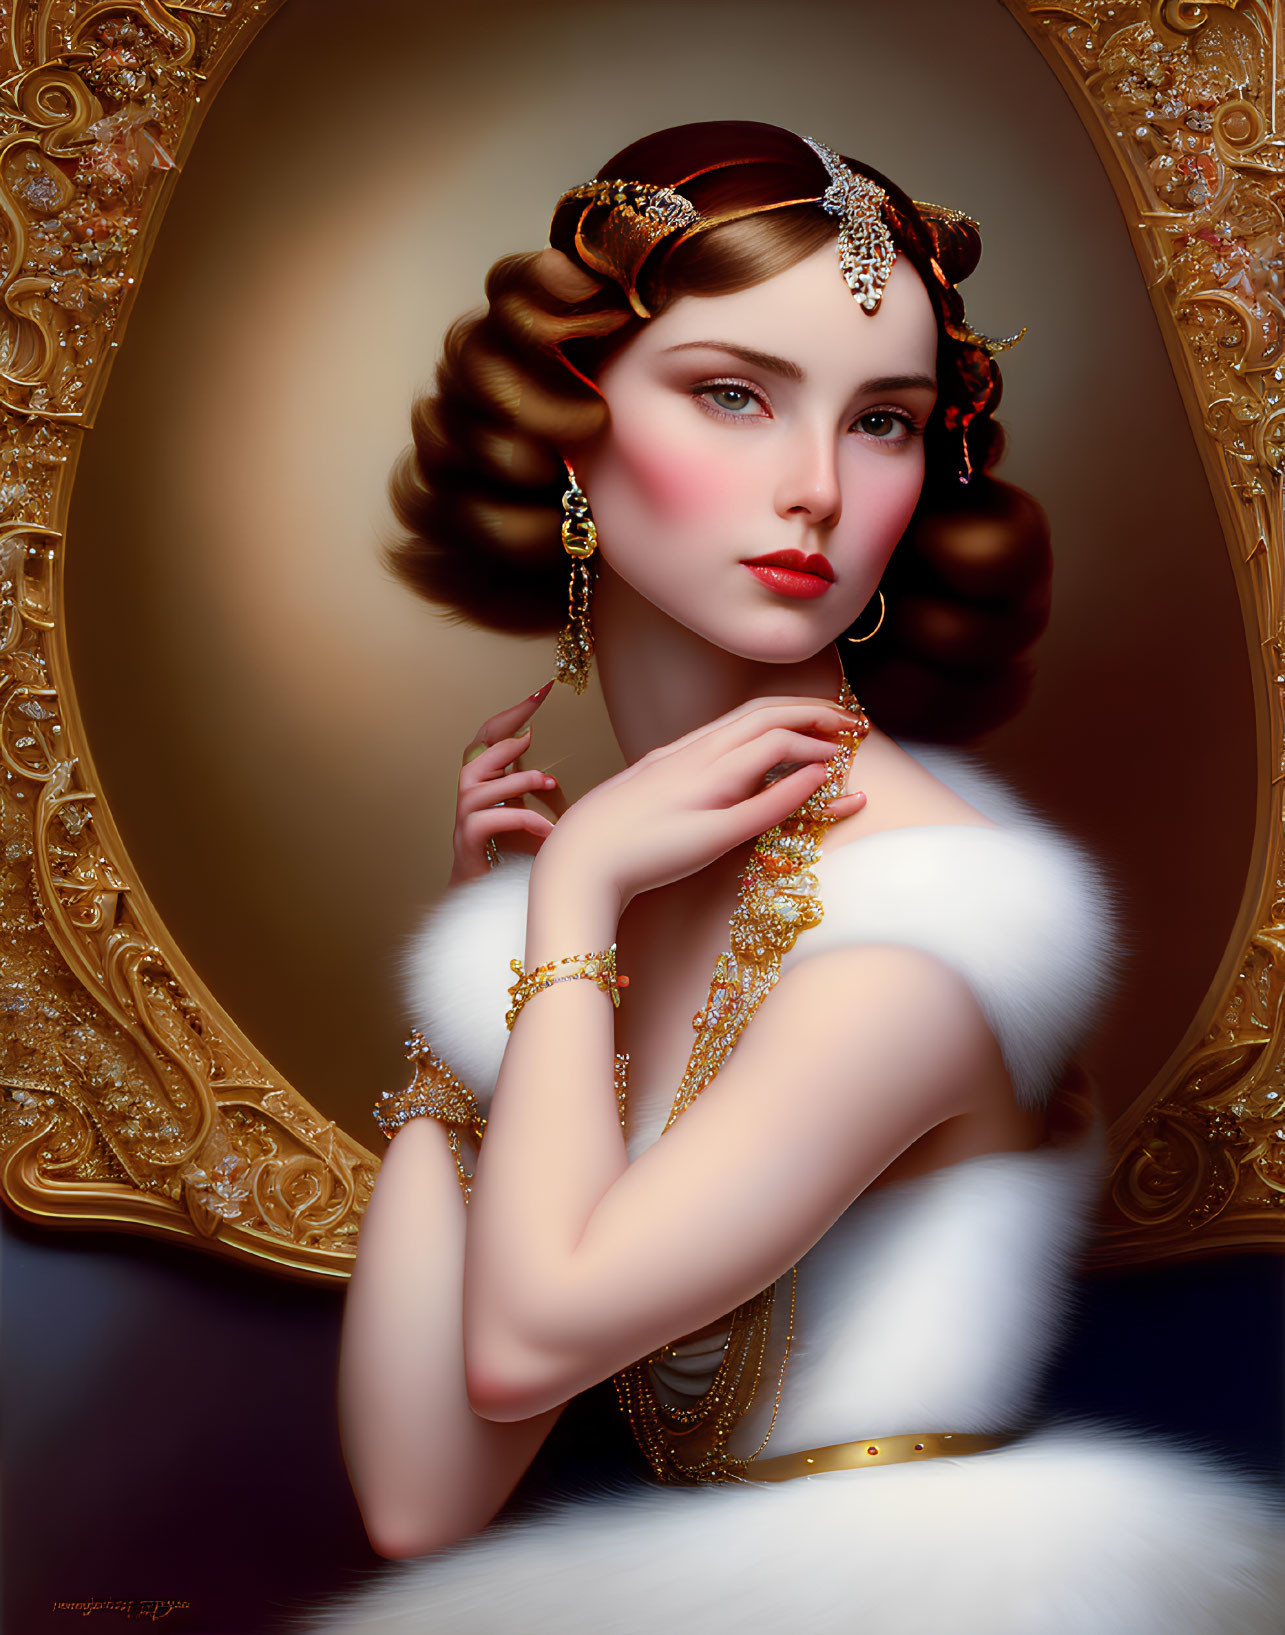 Vintage-inspired portrait of a woman with jeweled headpiece and fur stole